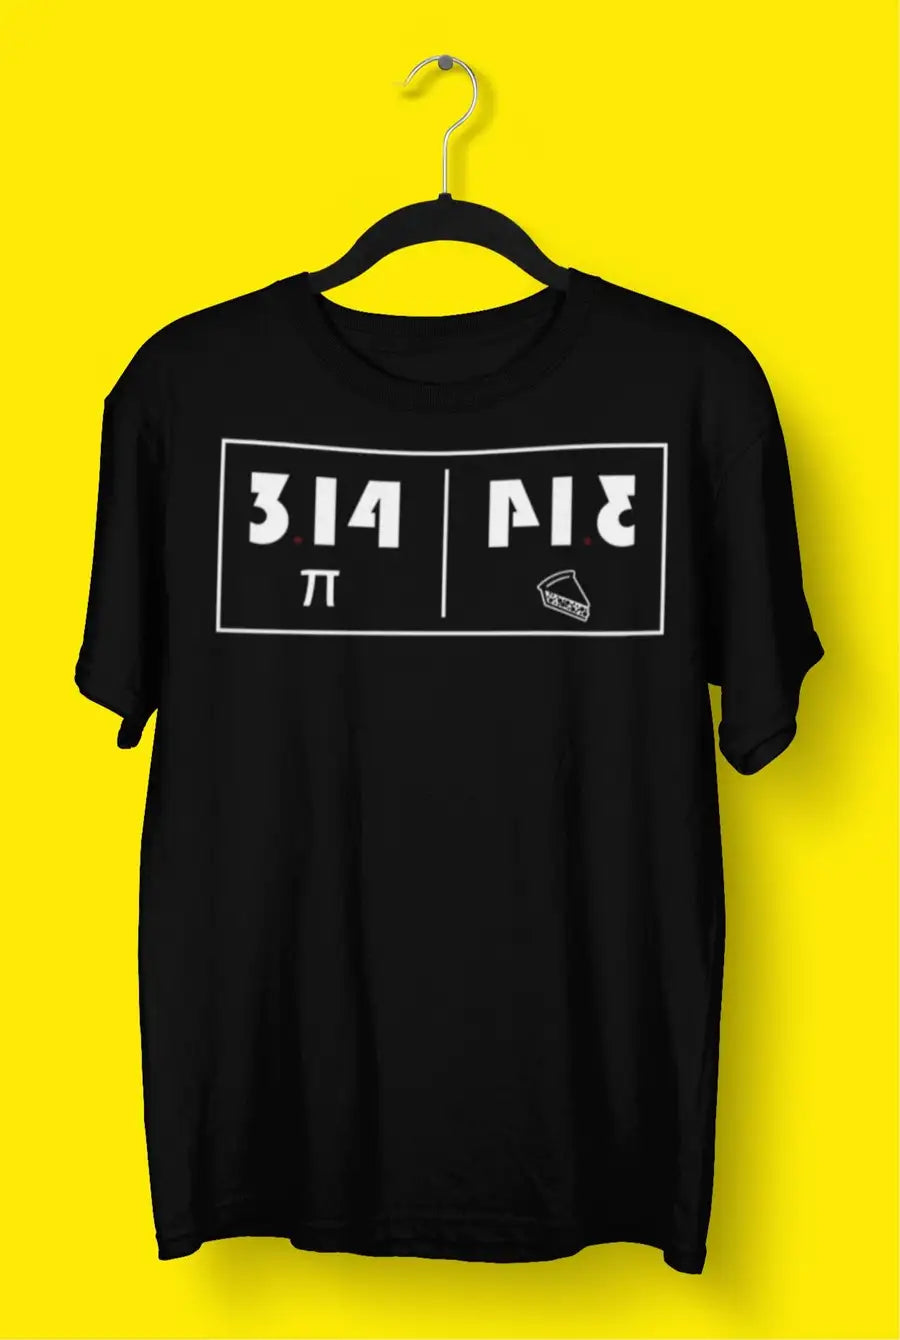 Pie Mirror Image T Shirt for Men and Women | Premium Design | Catch My Drift India - Catch My Drift India Clothing black, clothing, engineer, engineering, made in india, multi colour, shirt, 